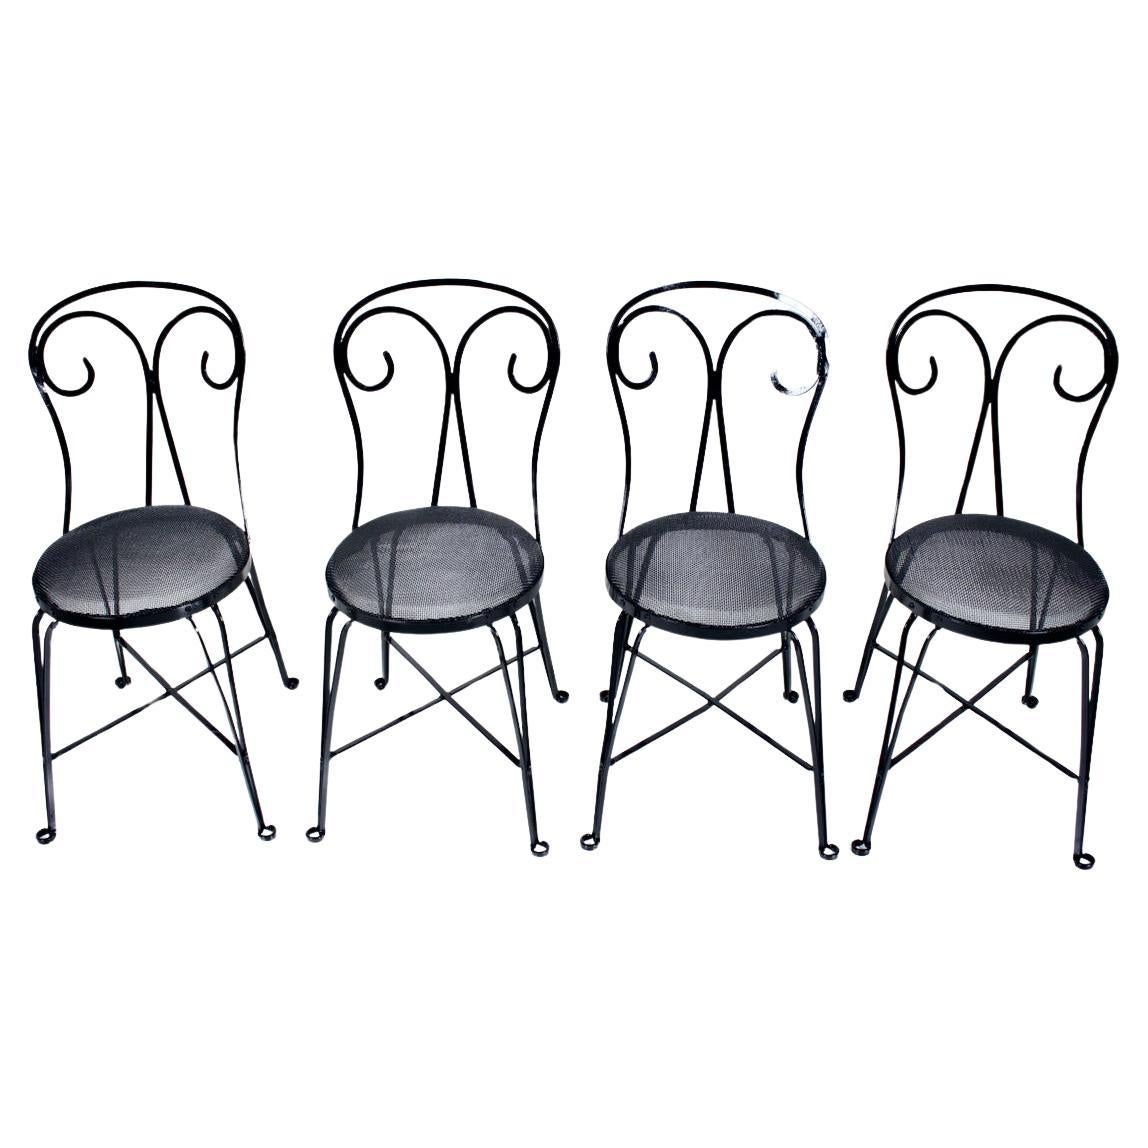 Set of 4 Black Enamel Wrought Iron Spring Wire Seat Garden Chairs, 1940s For Sale